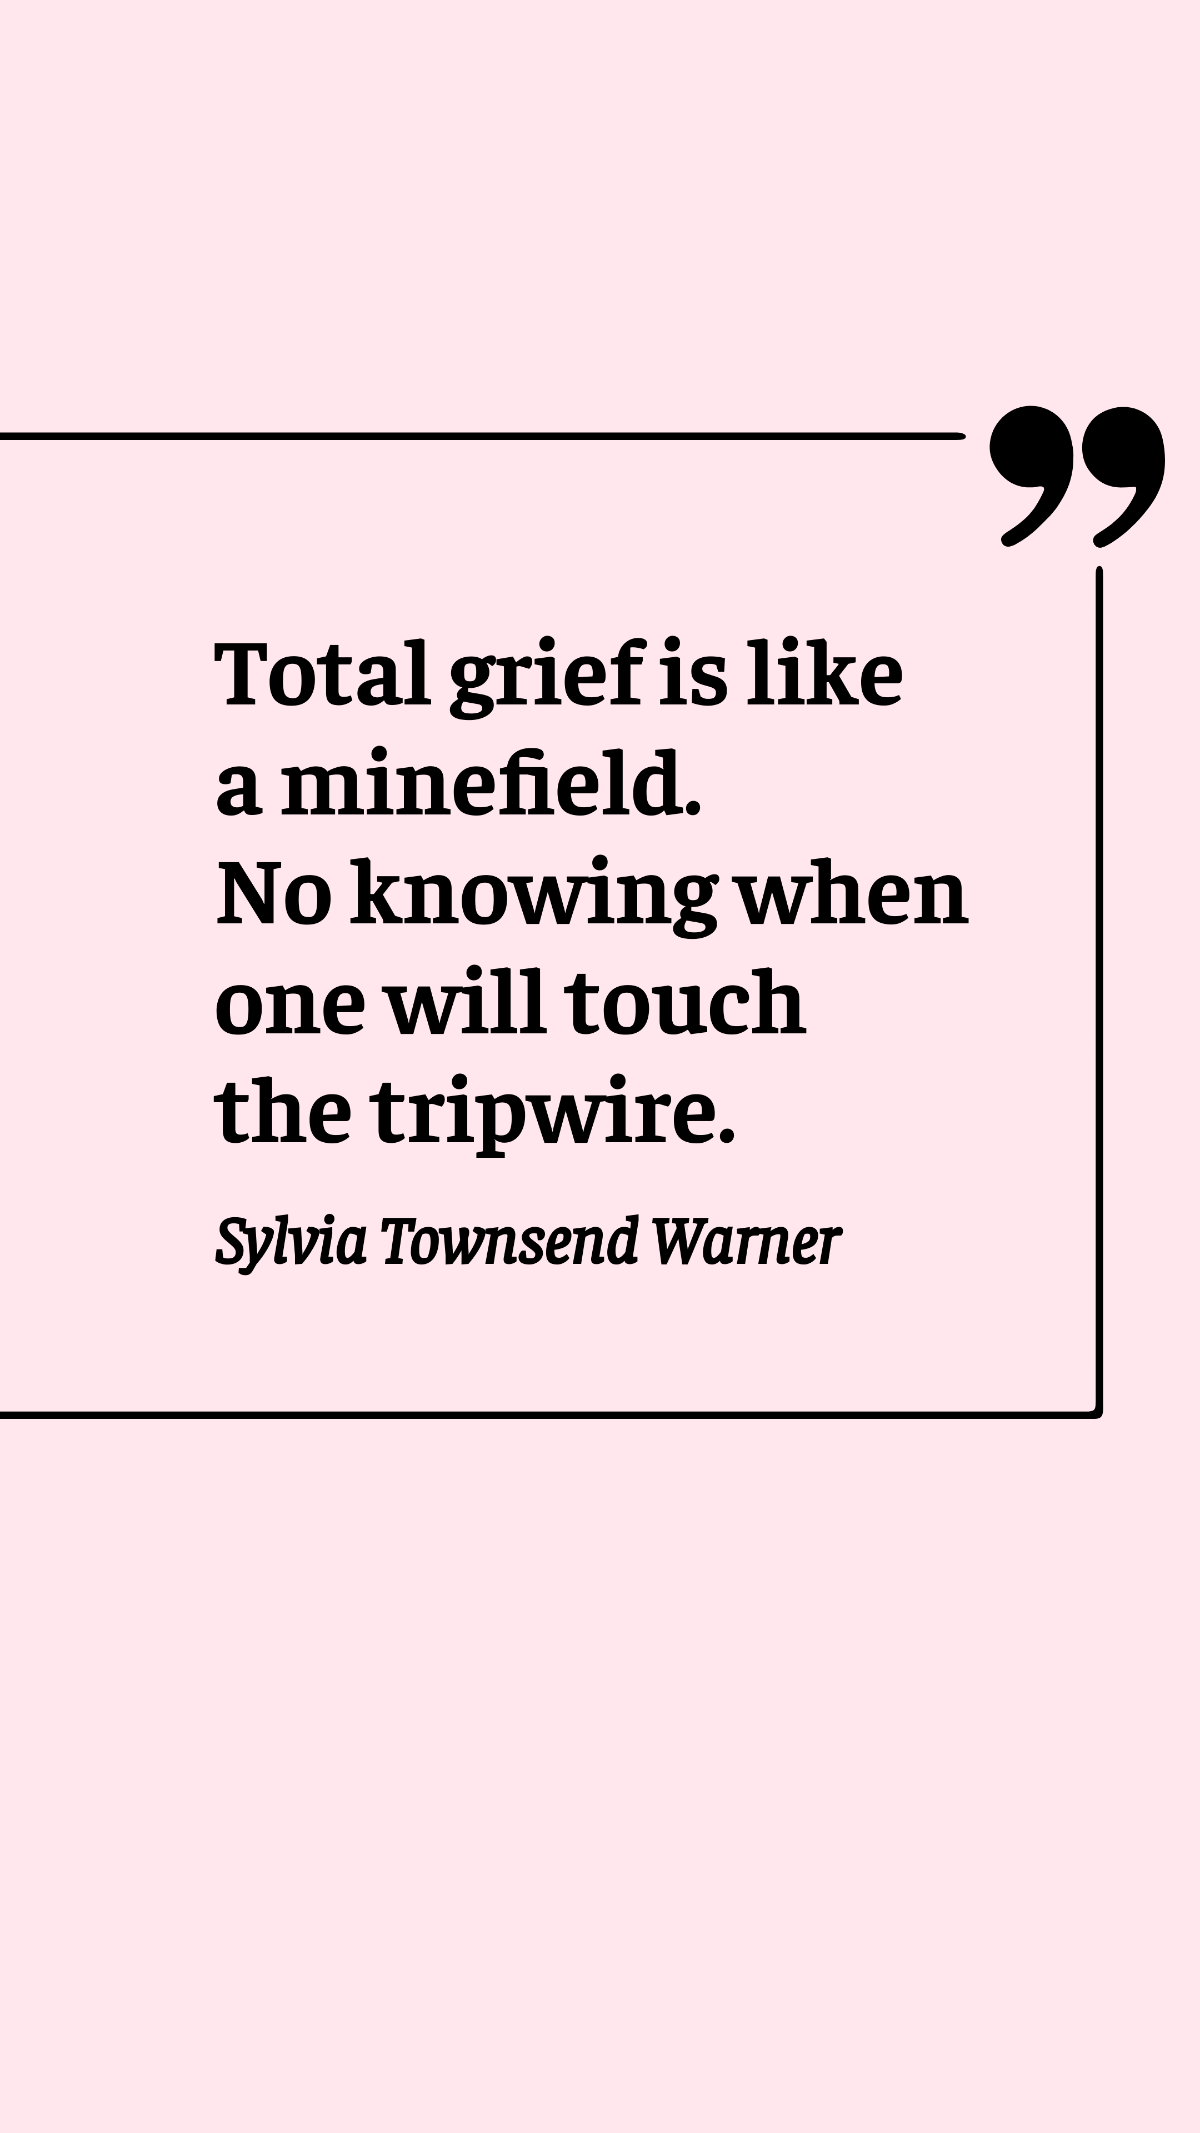 Sylvia Townsend Warner - Total grief is like a minefield. No knowing when one will touch the tripwire.